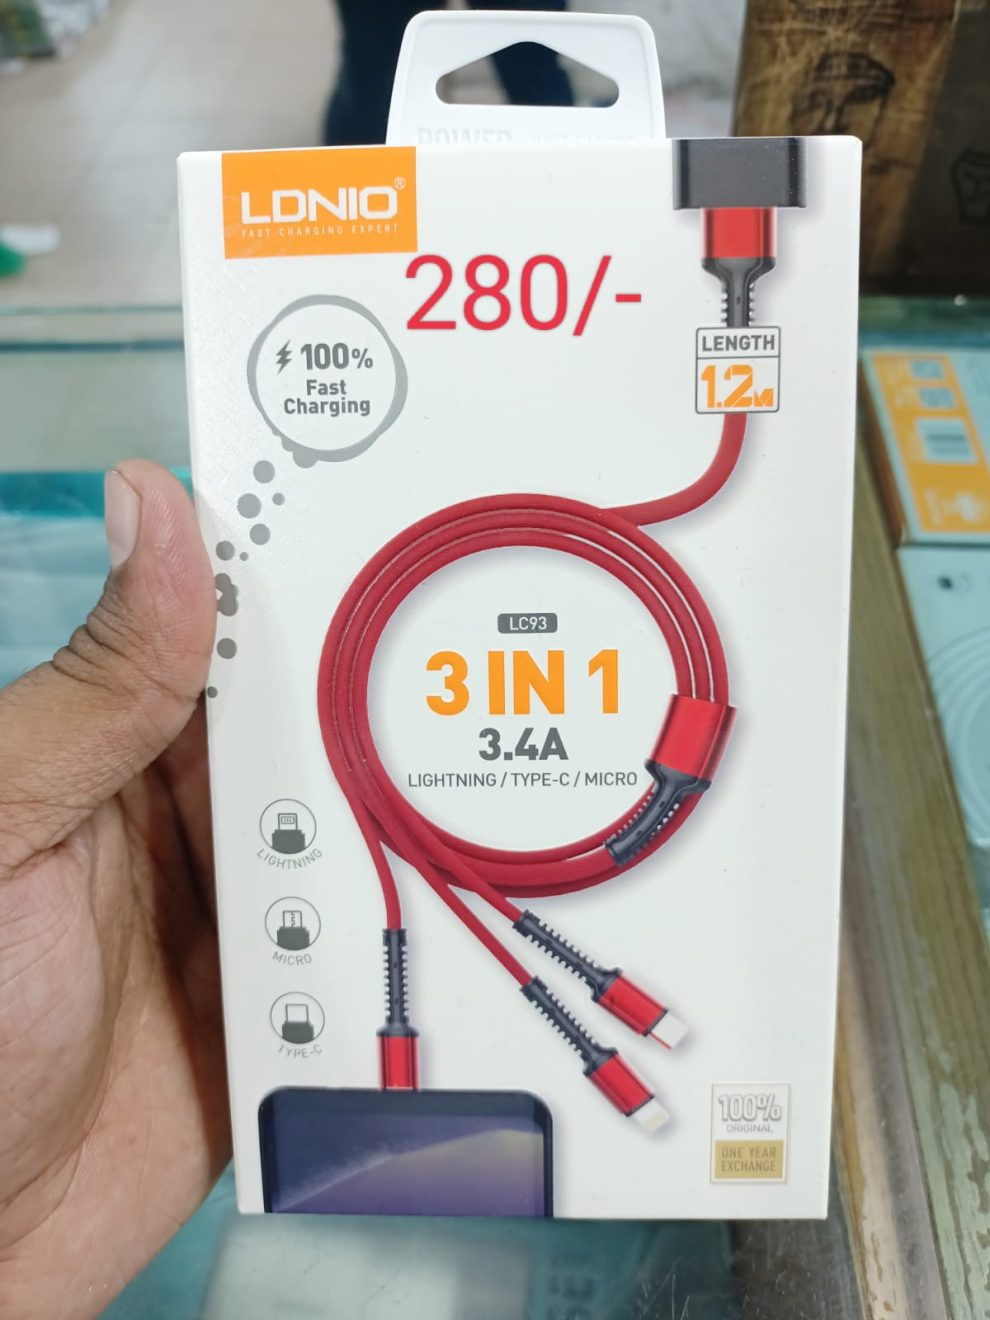 LDNIO LC93 3-in-1 Fast Charging Data Cable